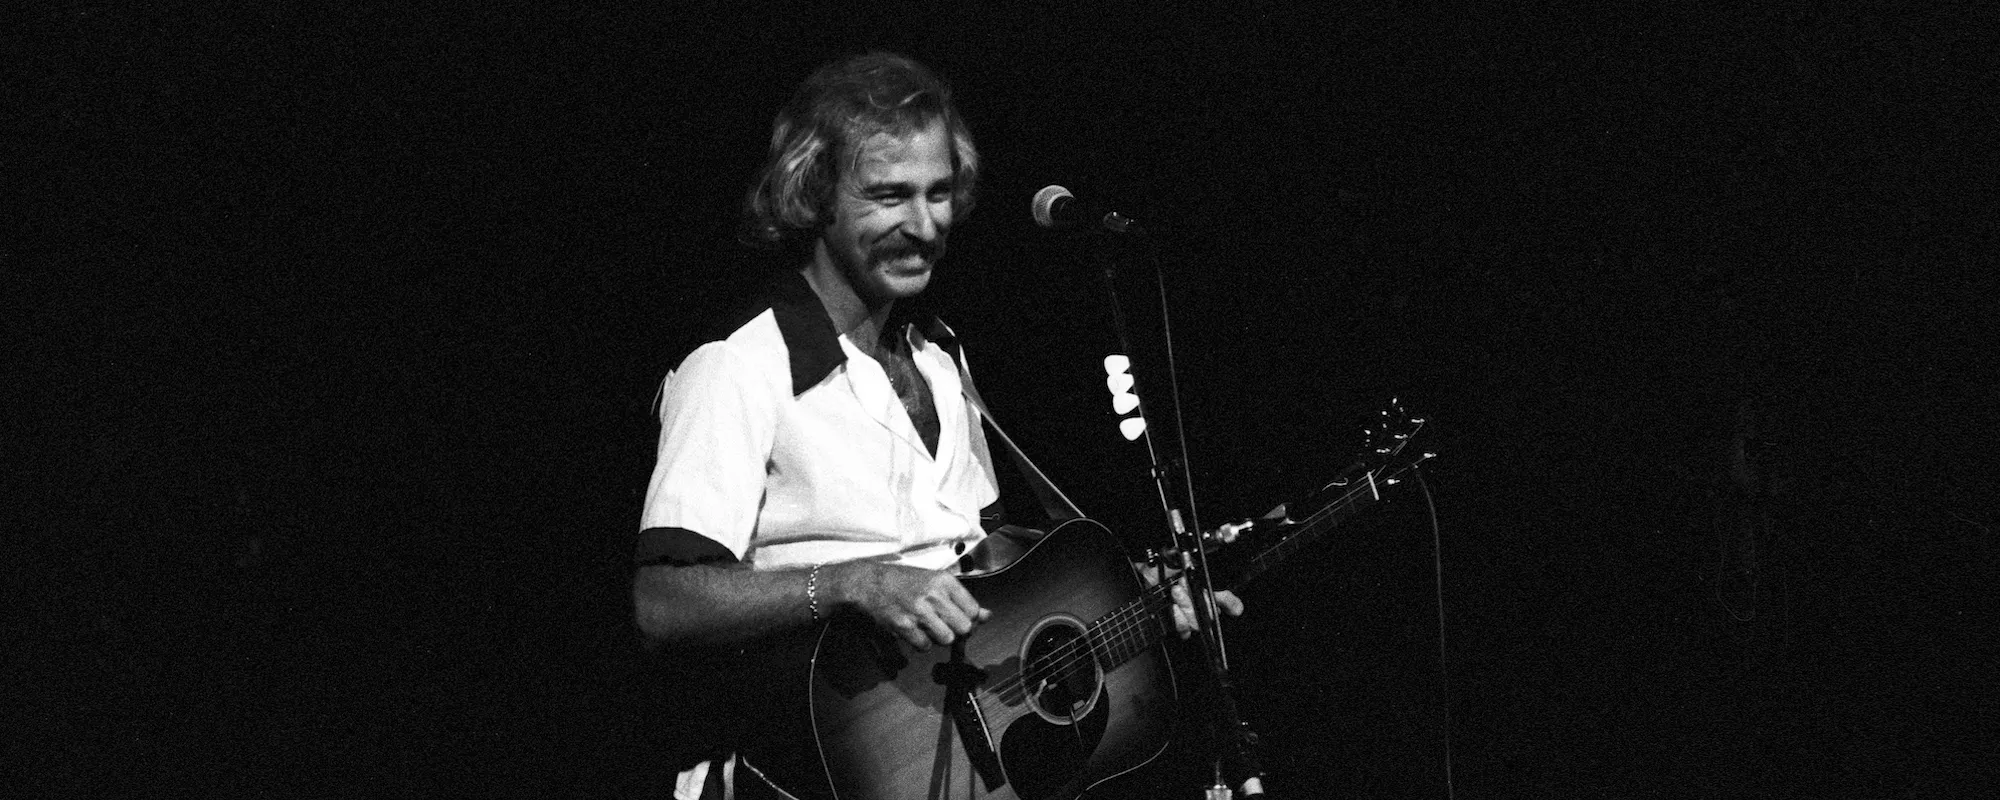 The Meaning Behind Jimmy Buffett’s First Hit and a Song That Helped Save His Life, “Come Monday”